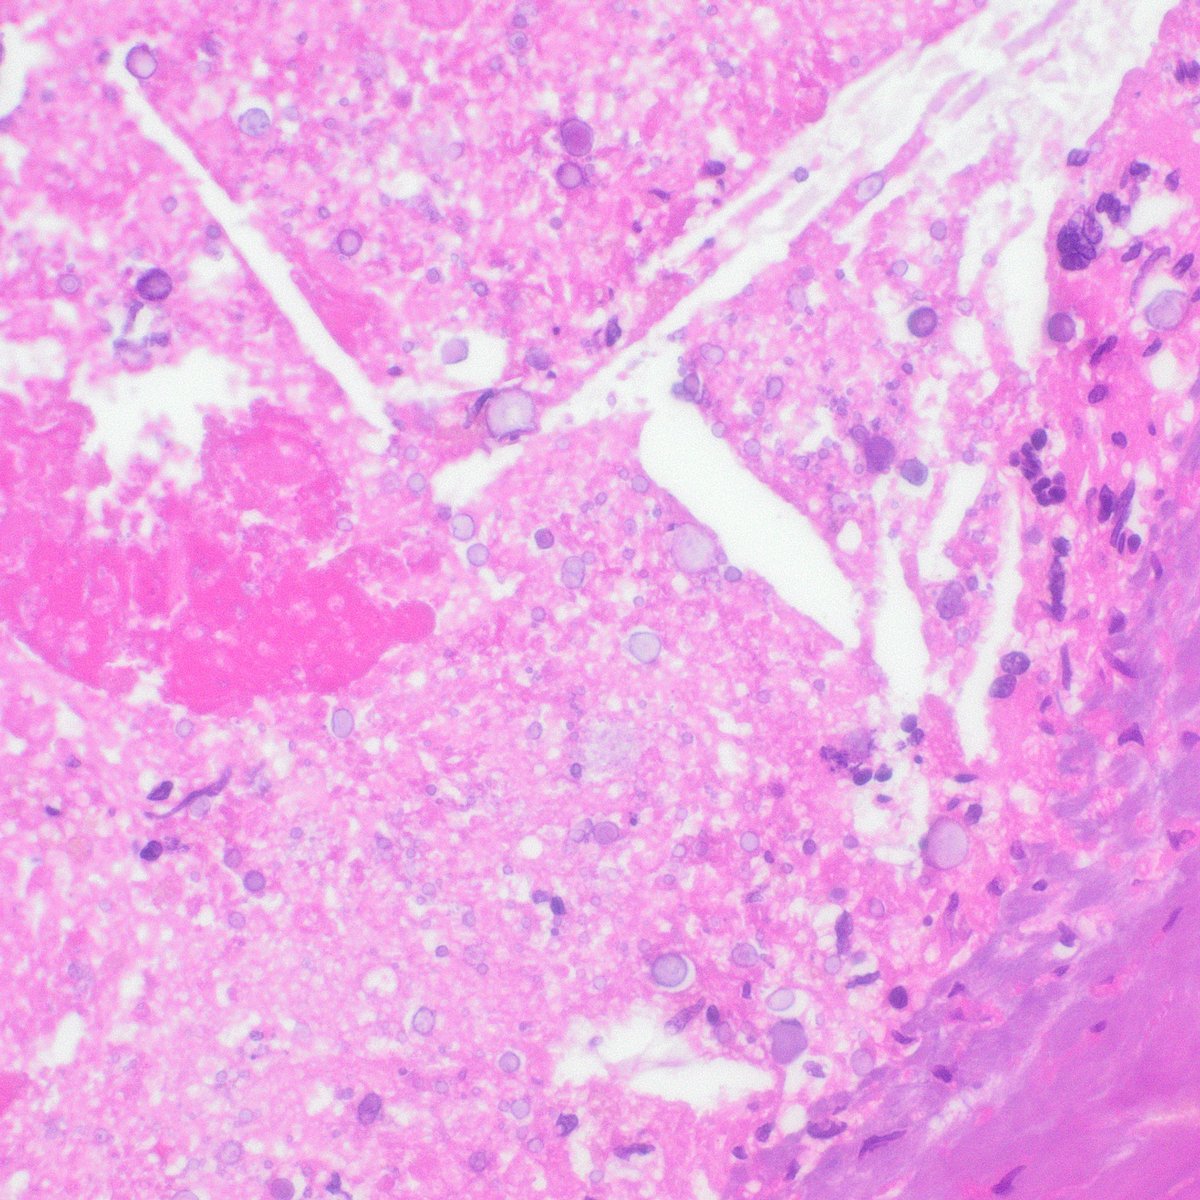 Bug thursday!

40 year old male with multiple cysts in the brain.

Can anyone tell me what type of bug this patient had and was treated for? 

Bonus points if anyone can name the showned structures.

#pathx #neuropath #pathology #pathologyresidents #Microbiology